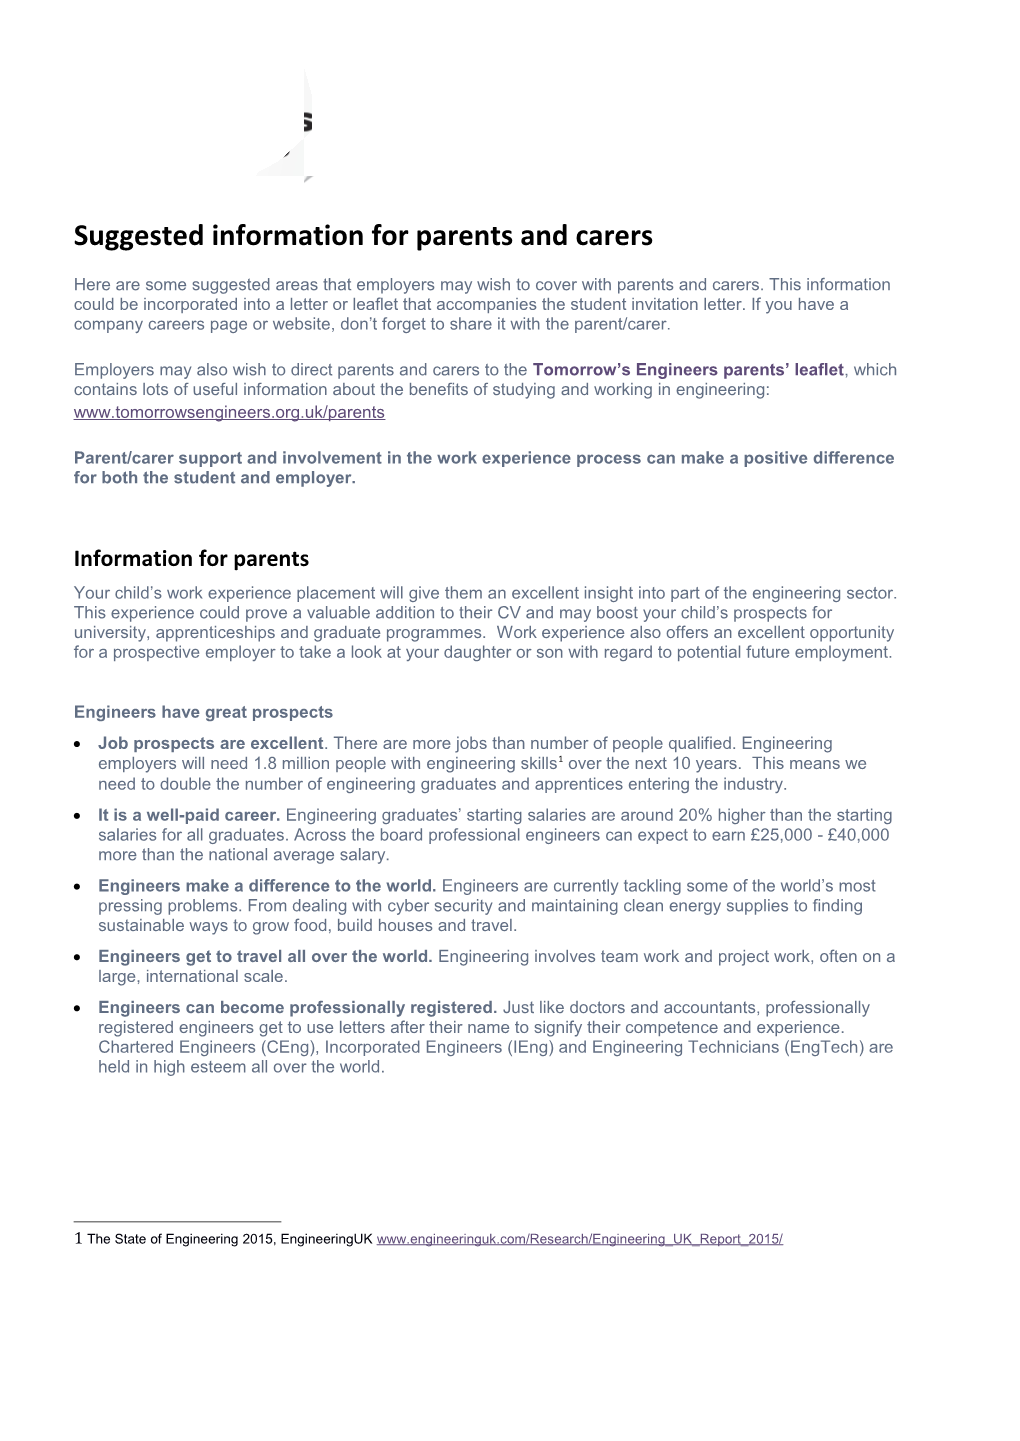 Suggested Information for Parents and Carers